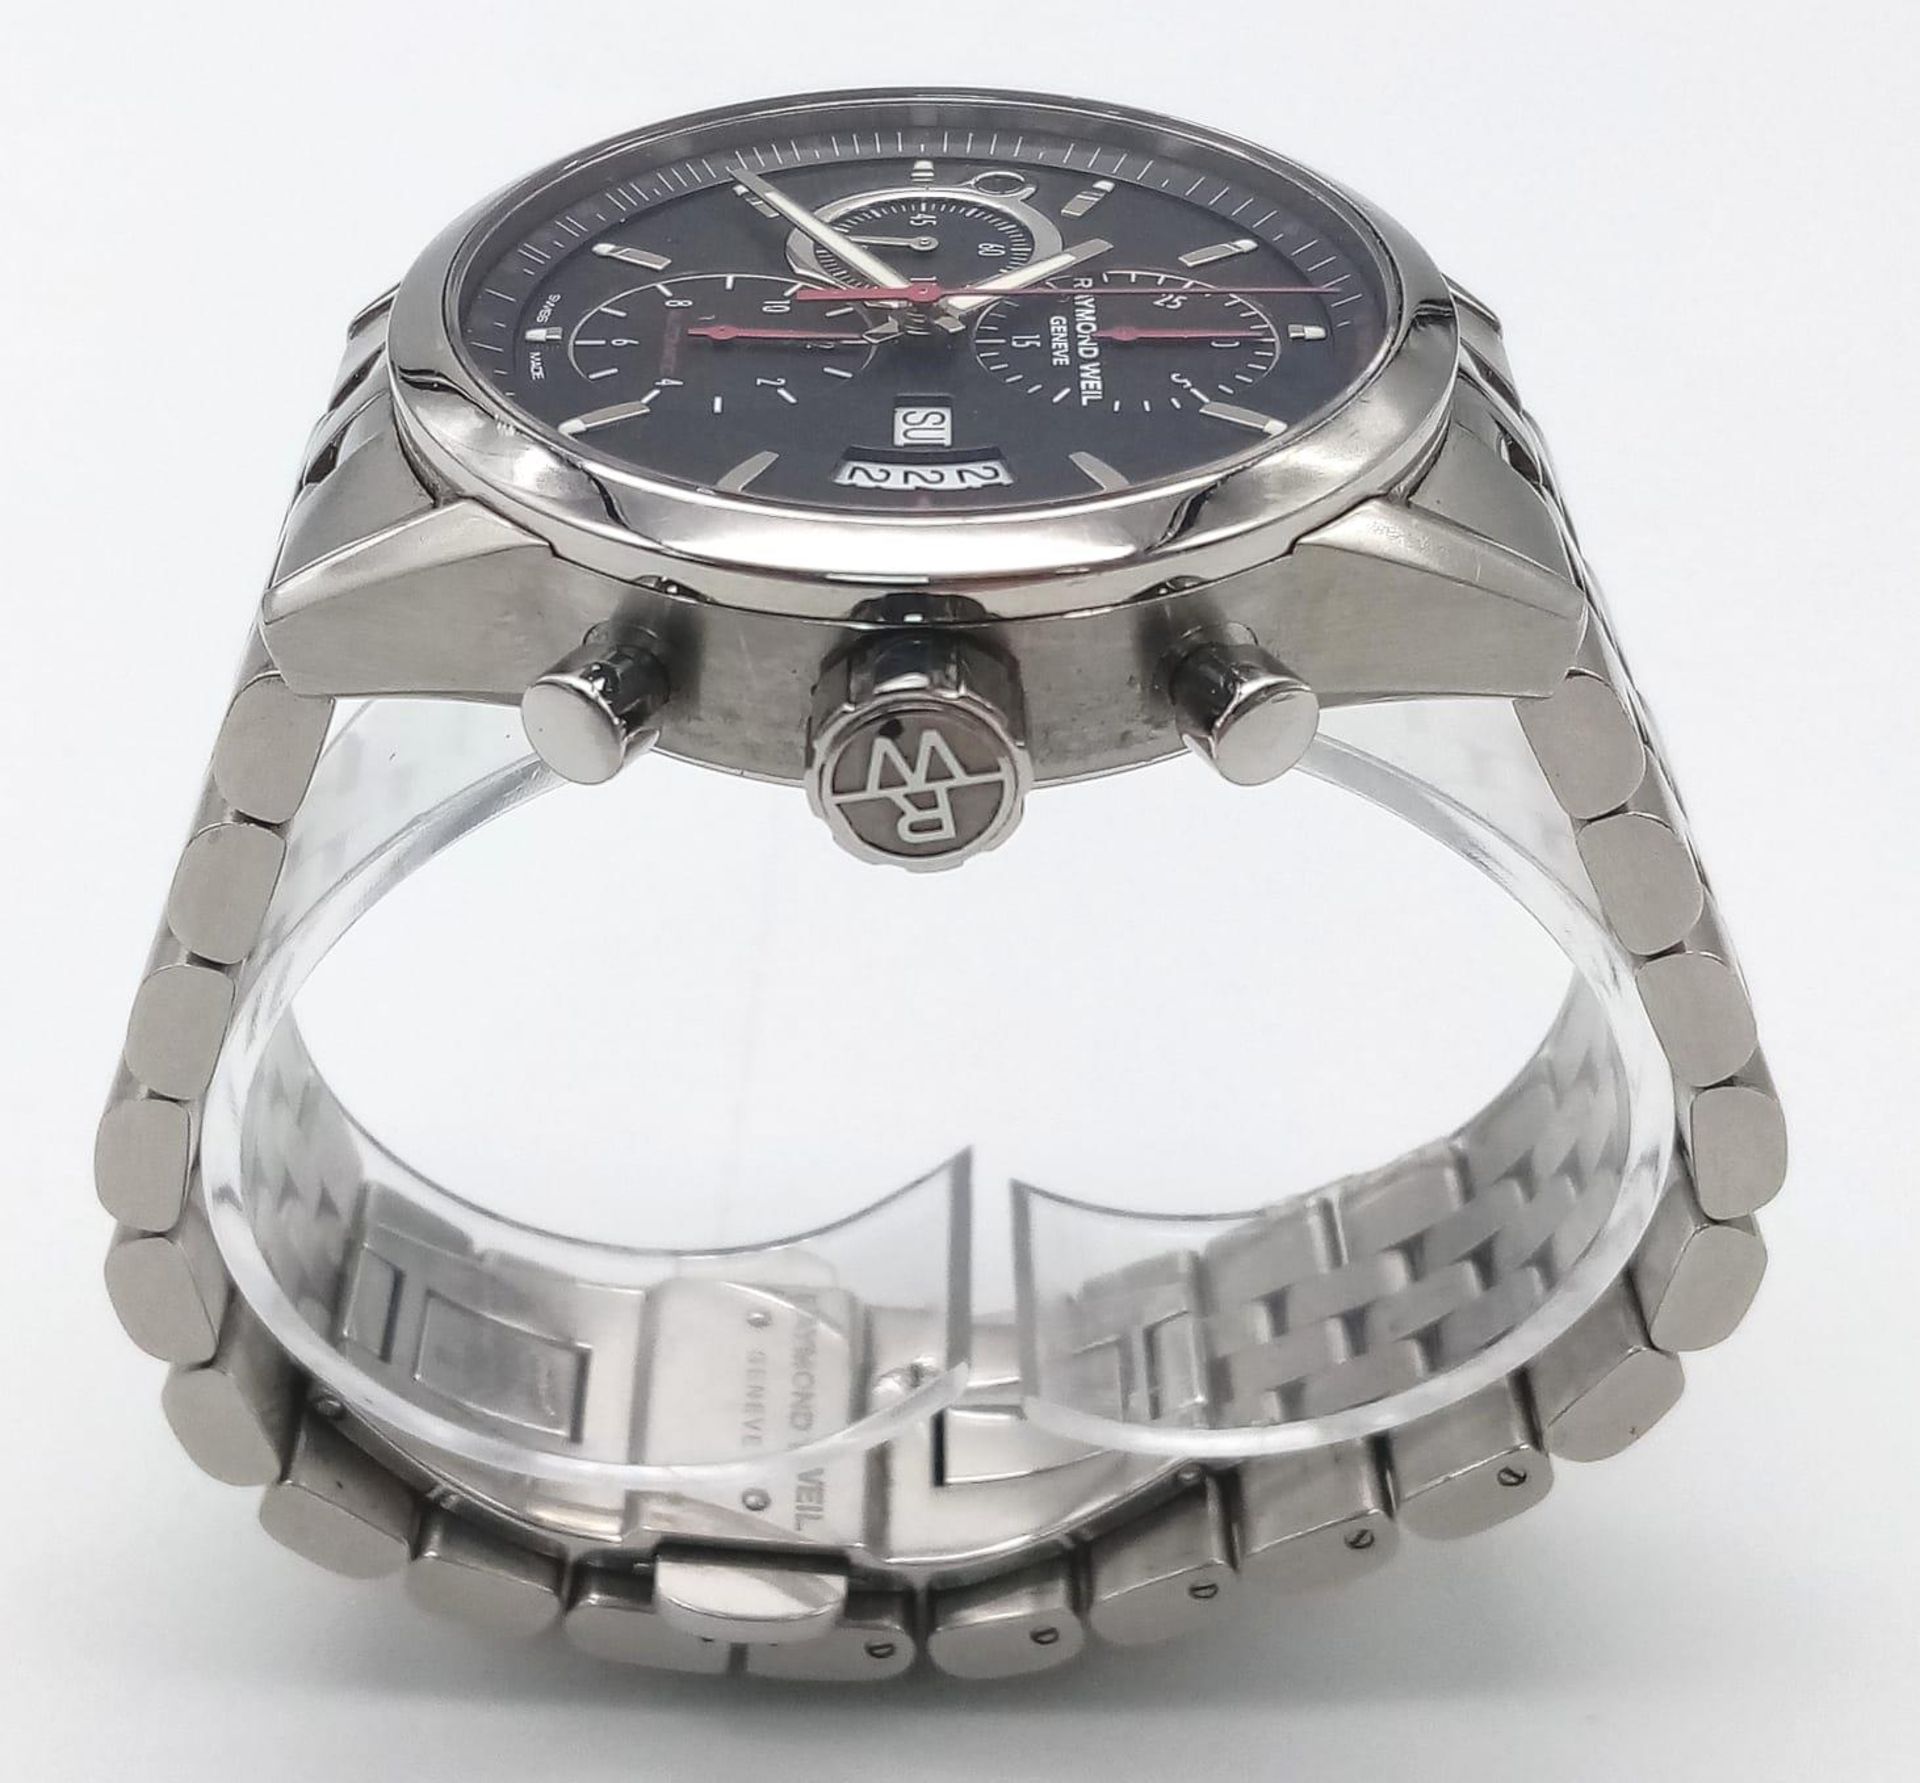 A Raymond Weil Automatic Chronograph Gents Watch. Stainless steel bracelet and case - 43mm. Black - Image 4 of 10